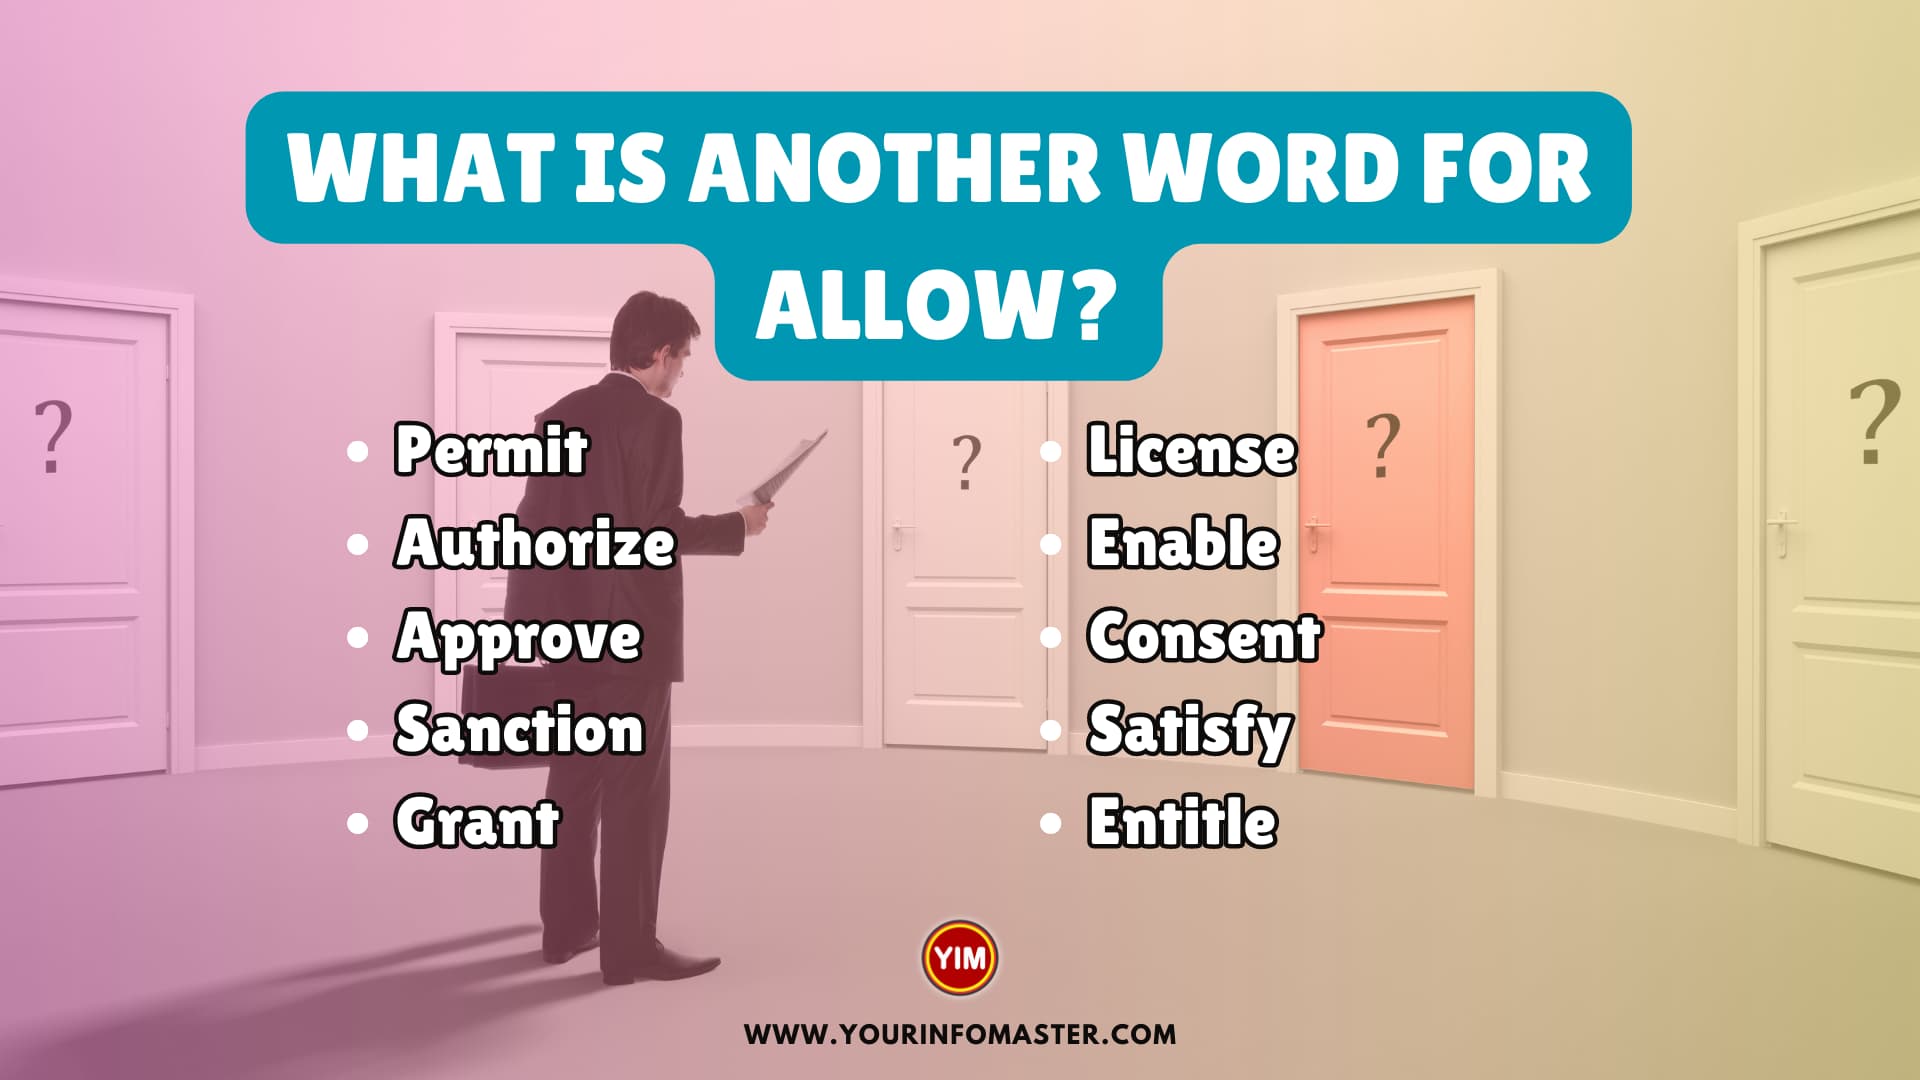 What is another word for Allow